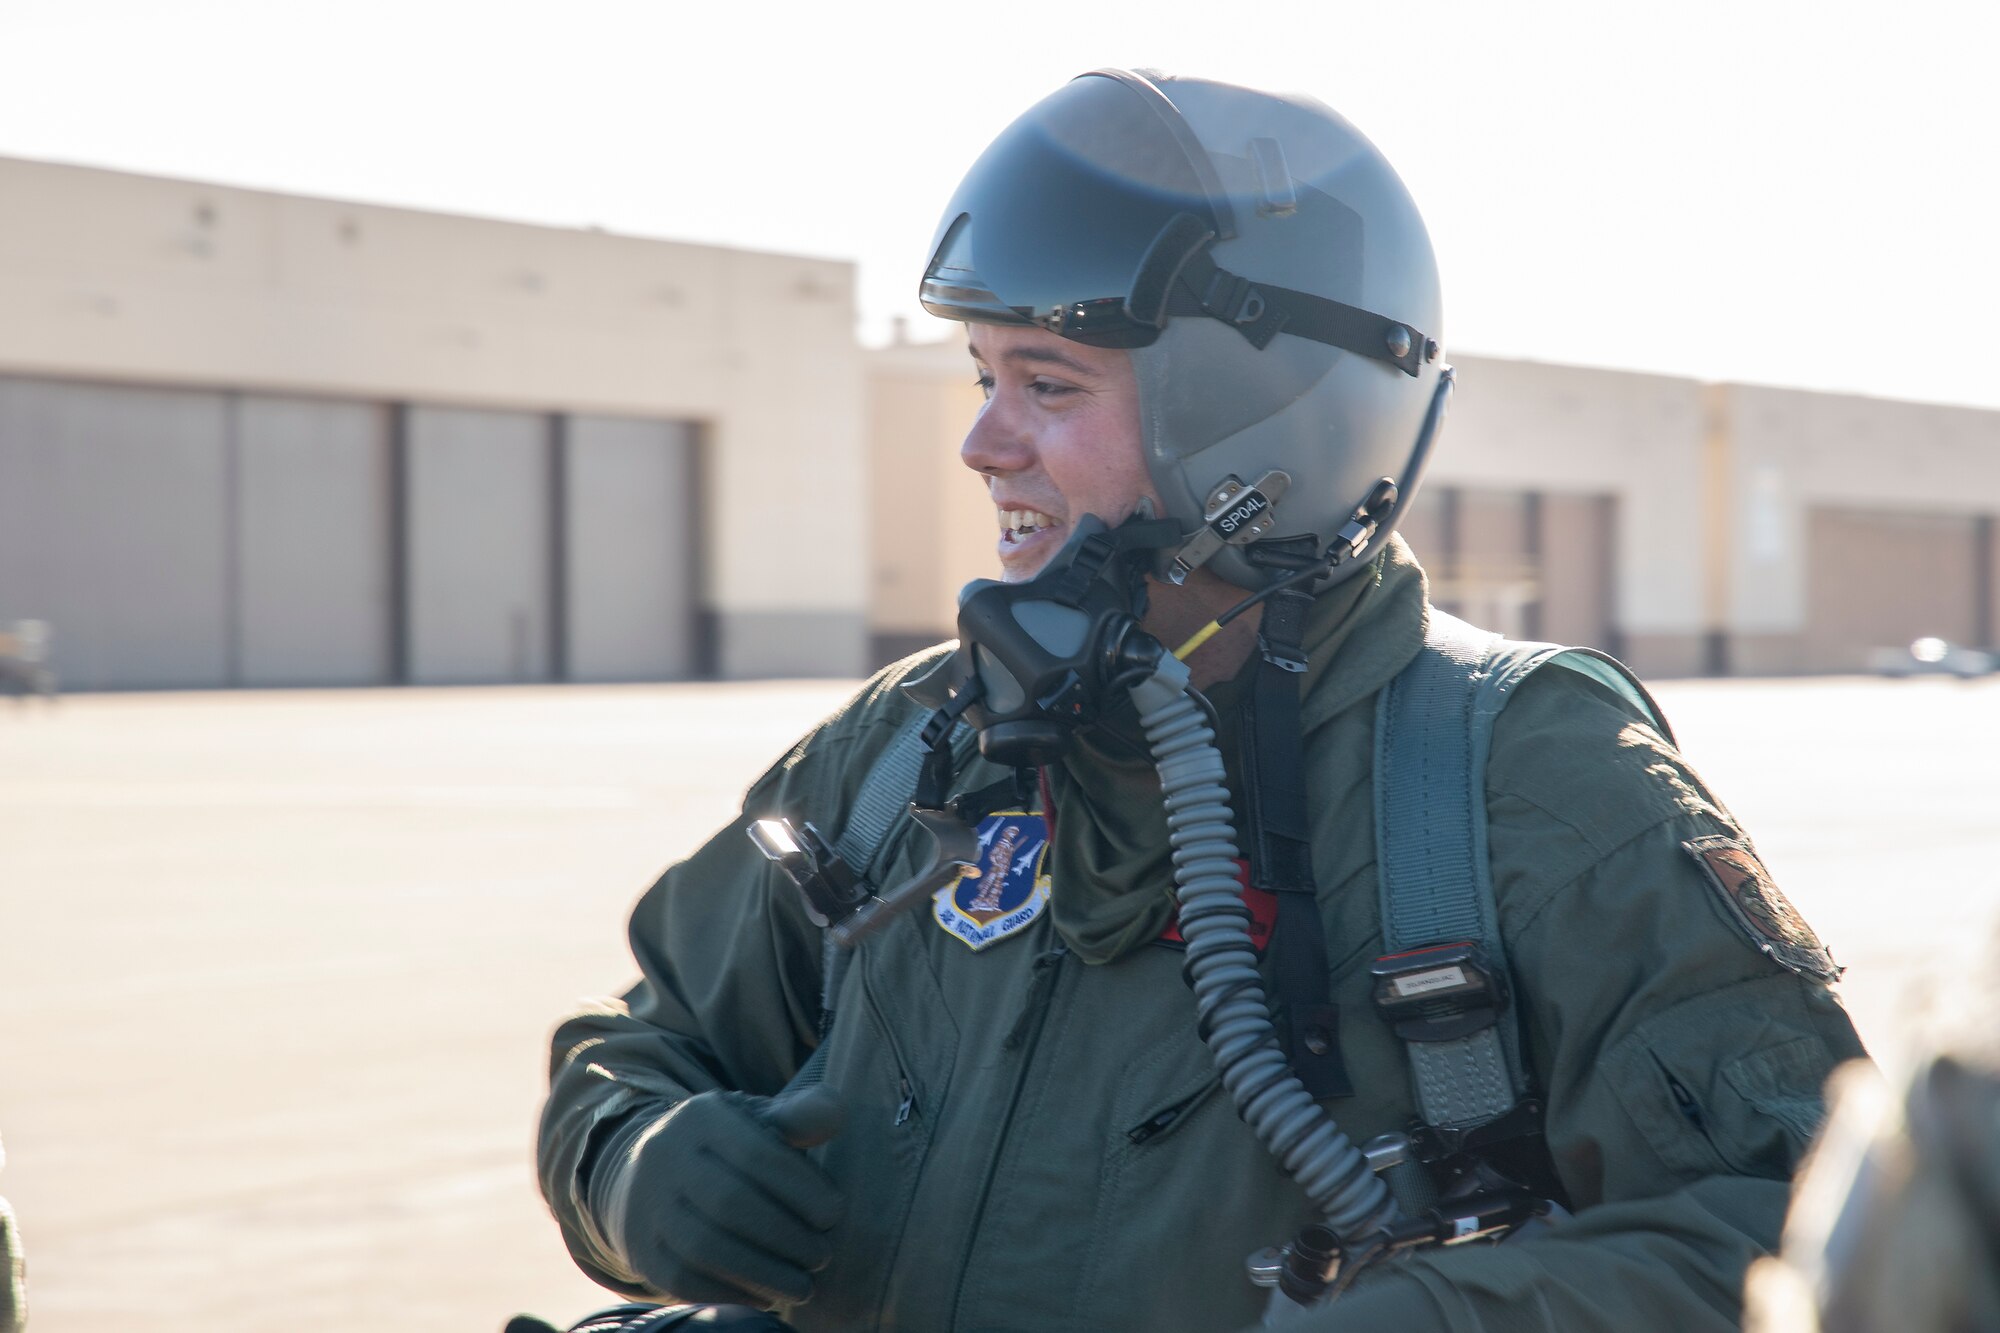 Master Sgt. Joshua Upton is all smiles following an incentive flight in a B-2 Spirit stealth bomber at Whiteman Air Force Base, Missouri, Jan 9, 2022. Upton, the wing's Maintainer of the Year, earned his ride in the aircraft due to his exemplary work throughout 2021. (U.S. Air National Guard photo, 131st Bomb Wing Public Affairs)